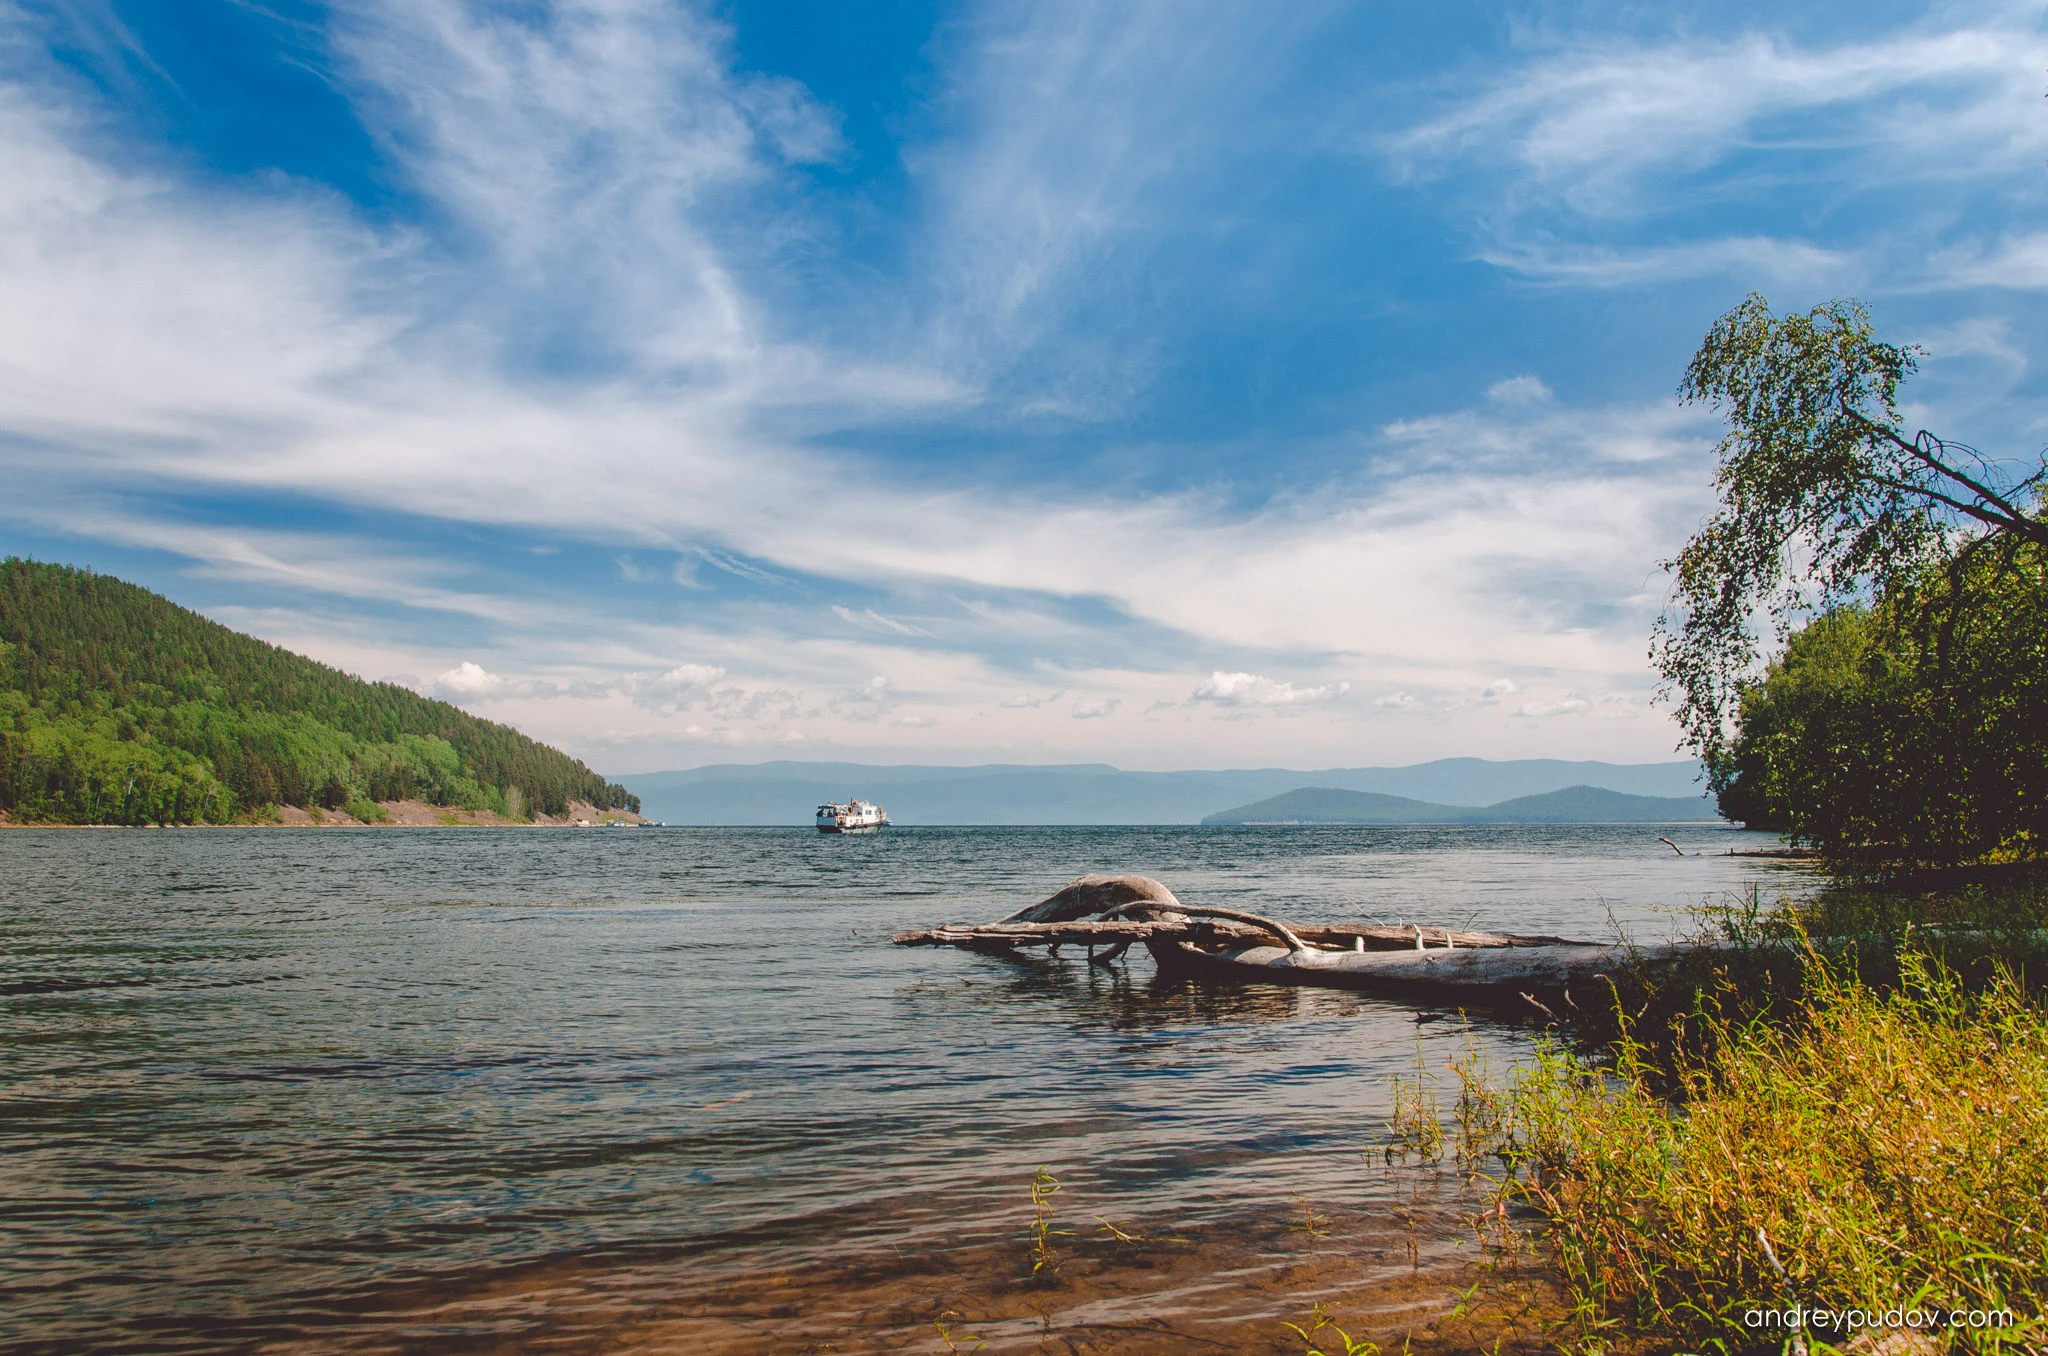 Lake Baikal - Zmeevaya Bay is known for its thermal and healing waters. The bay got its name from the non-venomous snakes - the eastern racer living in this area.